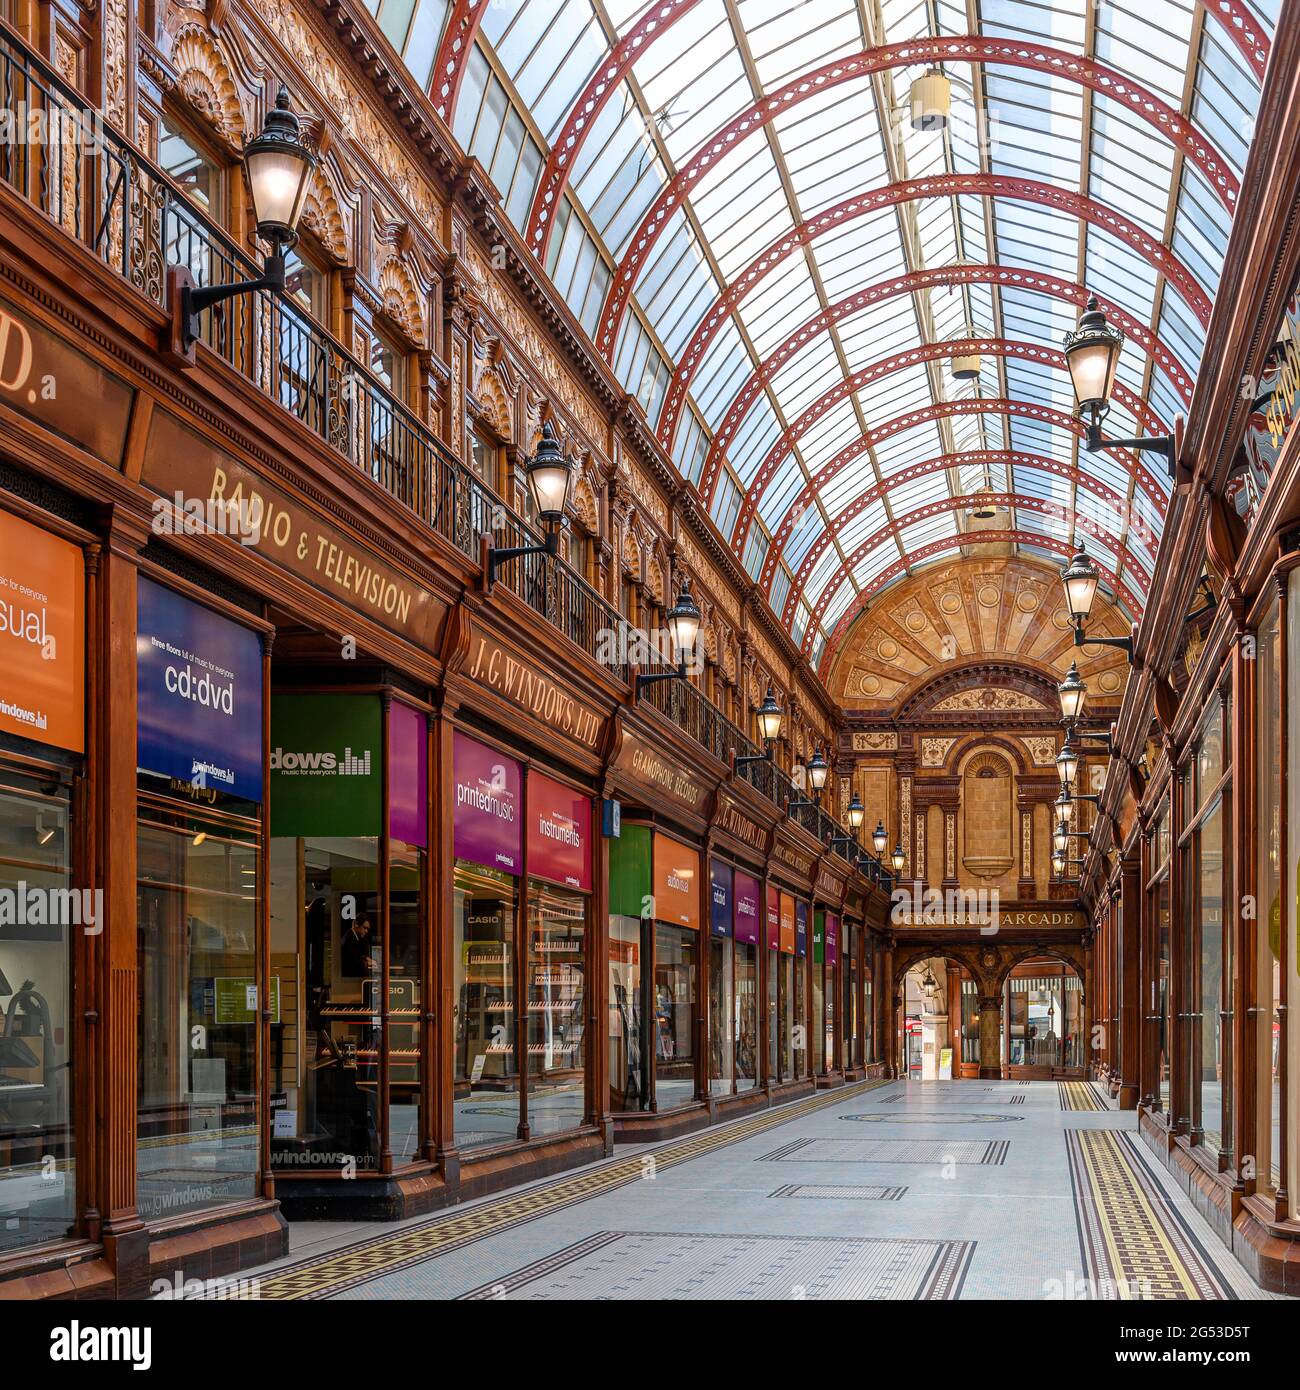 central-arcade-in-newcastle-was-built-in-1906-the-luscious-edwardian-arcade-is-lavishly-decorated-with-richly-coloured-art-nouveau-faence-tiles-2G53D5T.jpg